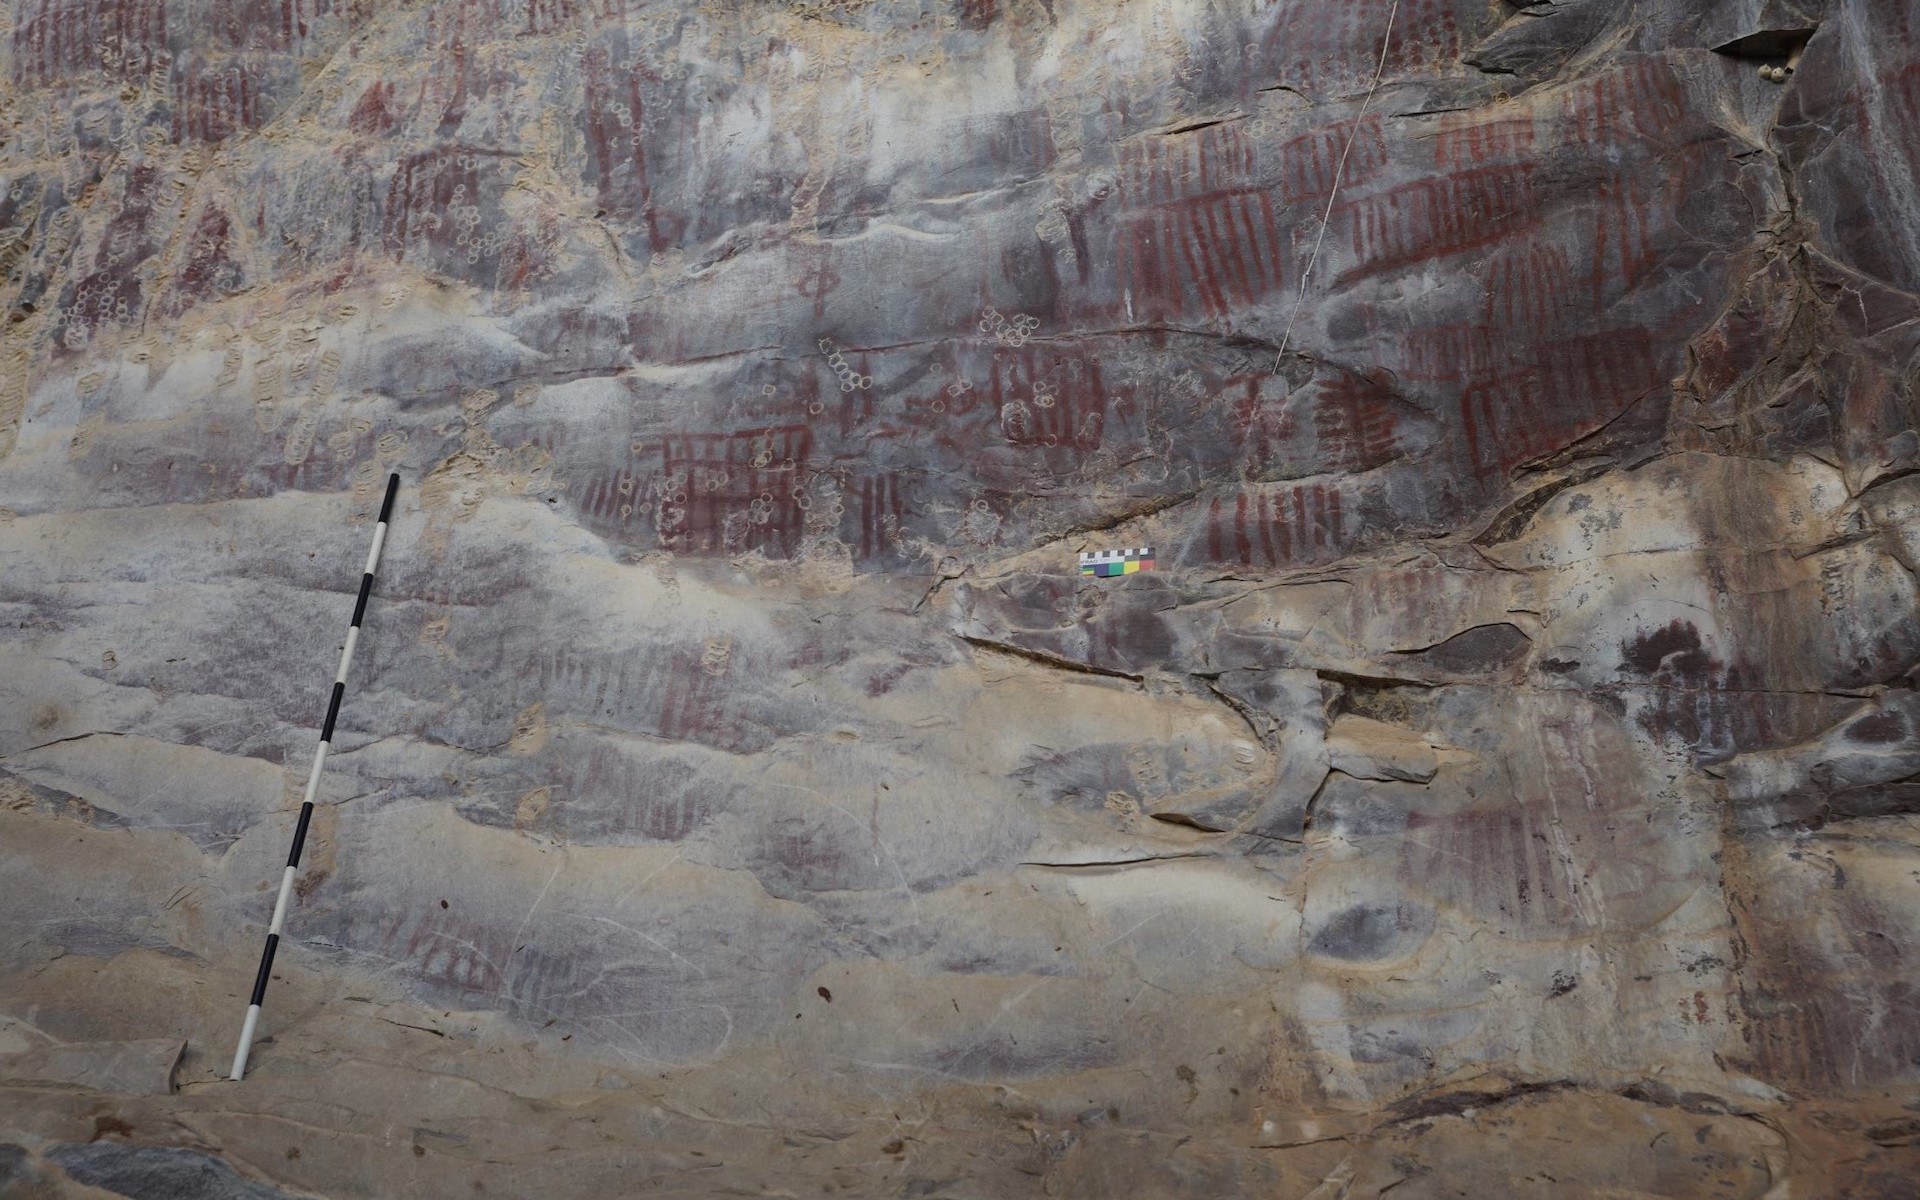 More examples of newly found rock art are seen in this photo.